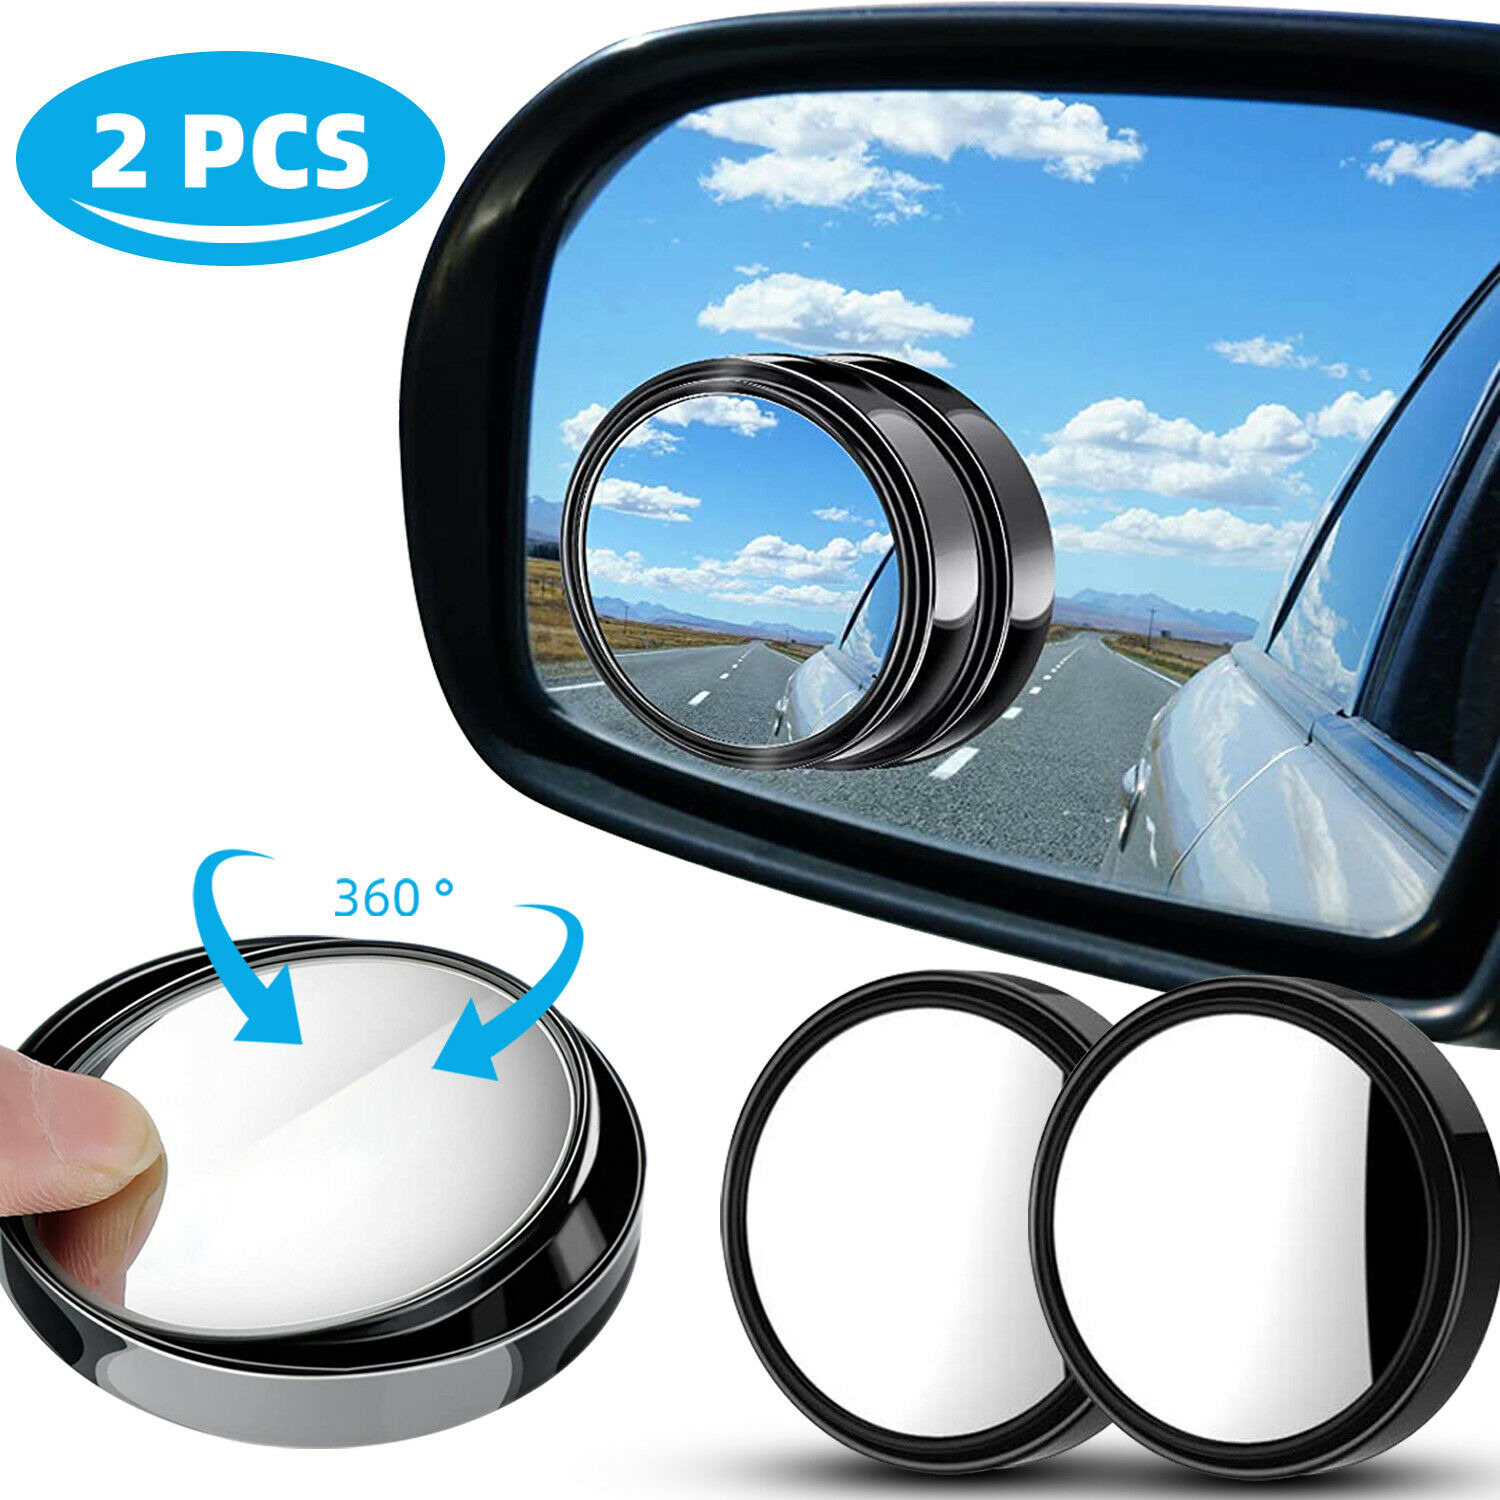 2Pcs Blind Spot Mirrors Round HD Glass Convex 360° Side Rear View Mirror for Car